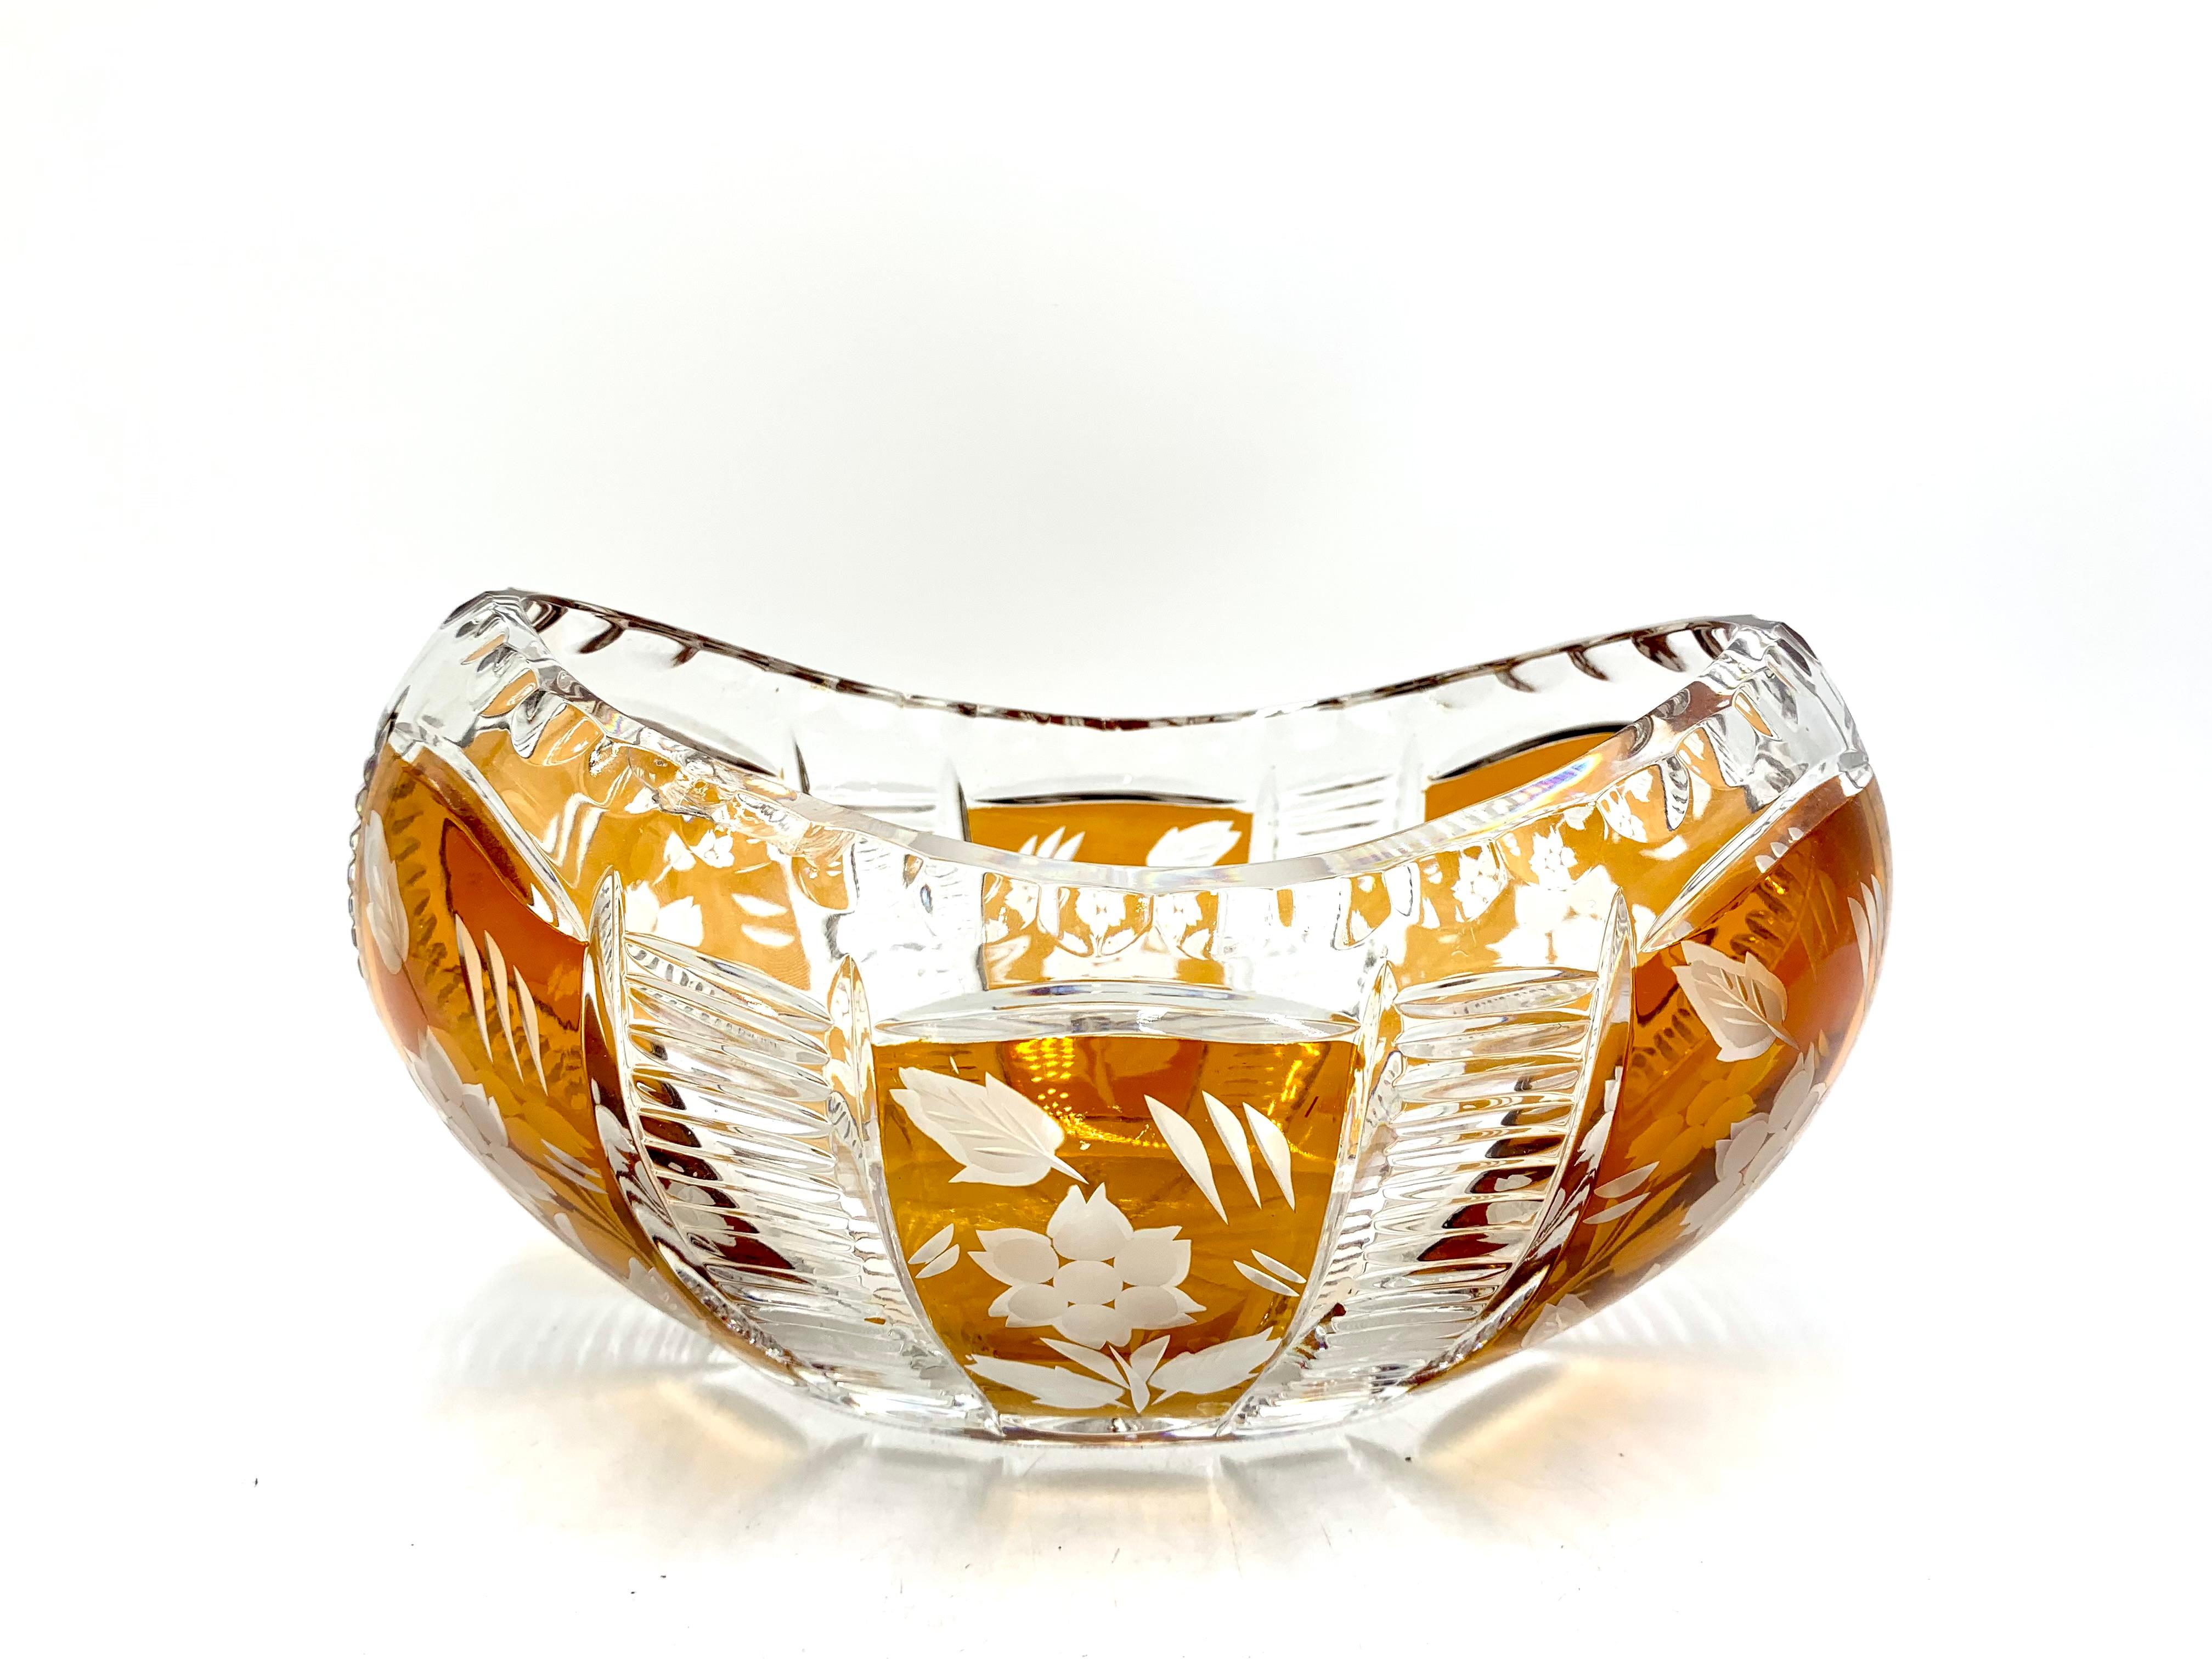 Vintage crystal bowl

Produced in Poland by the Julia Glassworks in the 1960s.

Very good condition

Measures: height 13cm, width 25cm, depth 14cm.